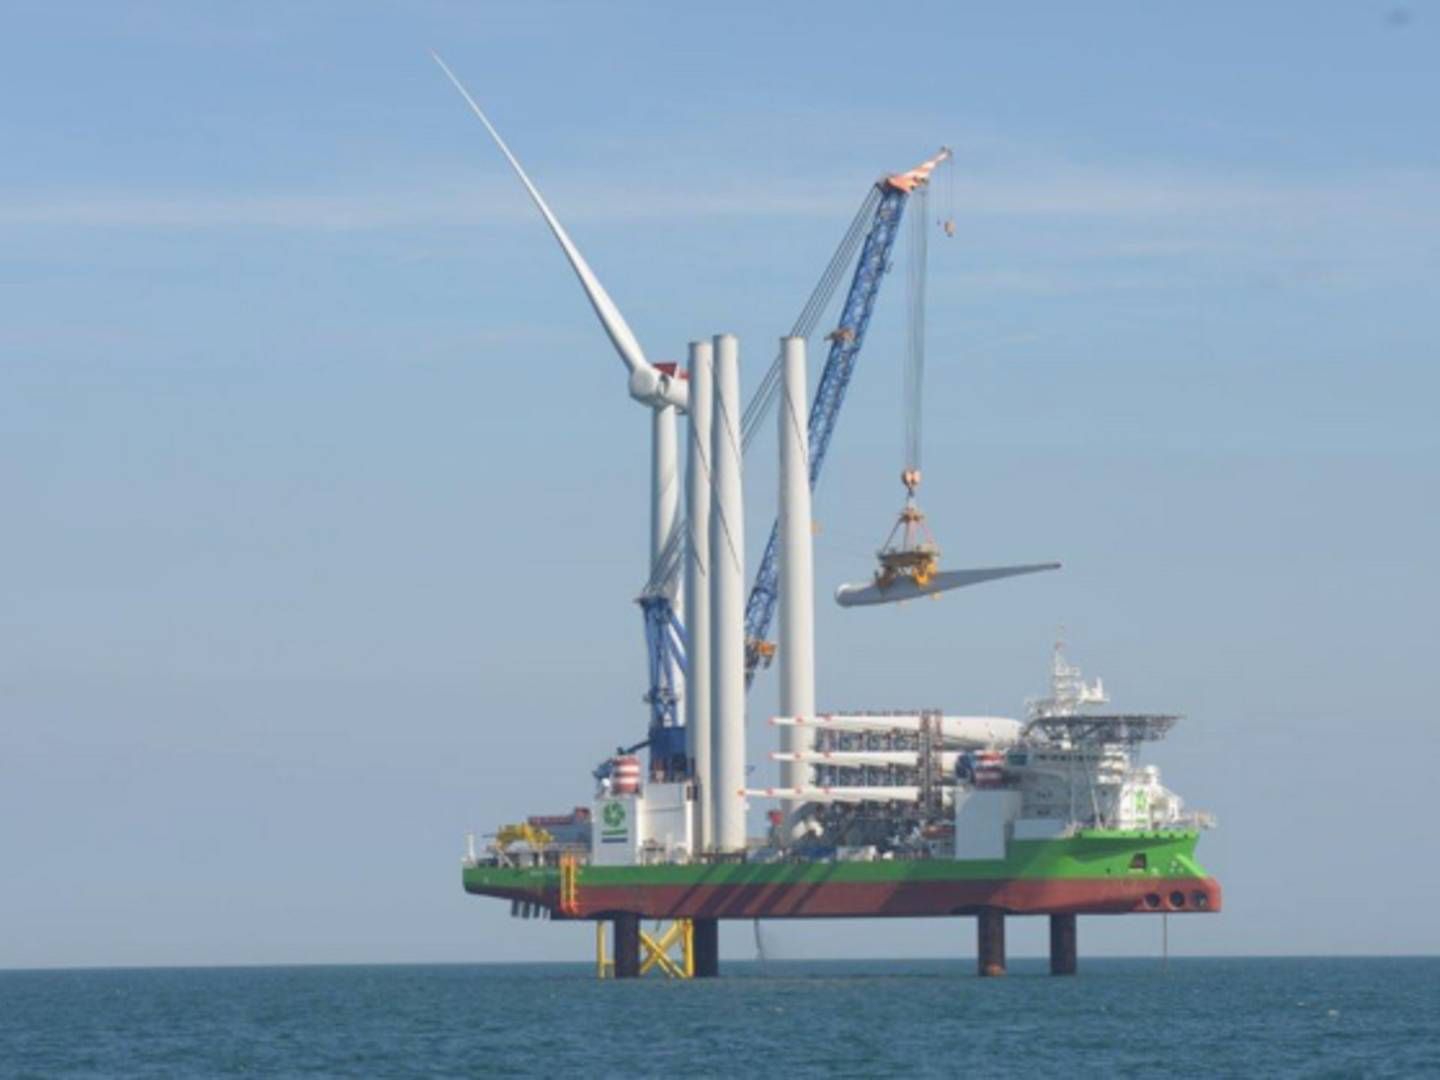 It'll be a while before this becomes a common sight in Sweden. Photo shows construction of Iberdrola's East Anglia wind farm. | Photo: Iberdrola